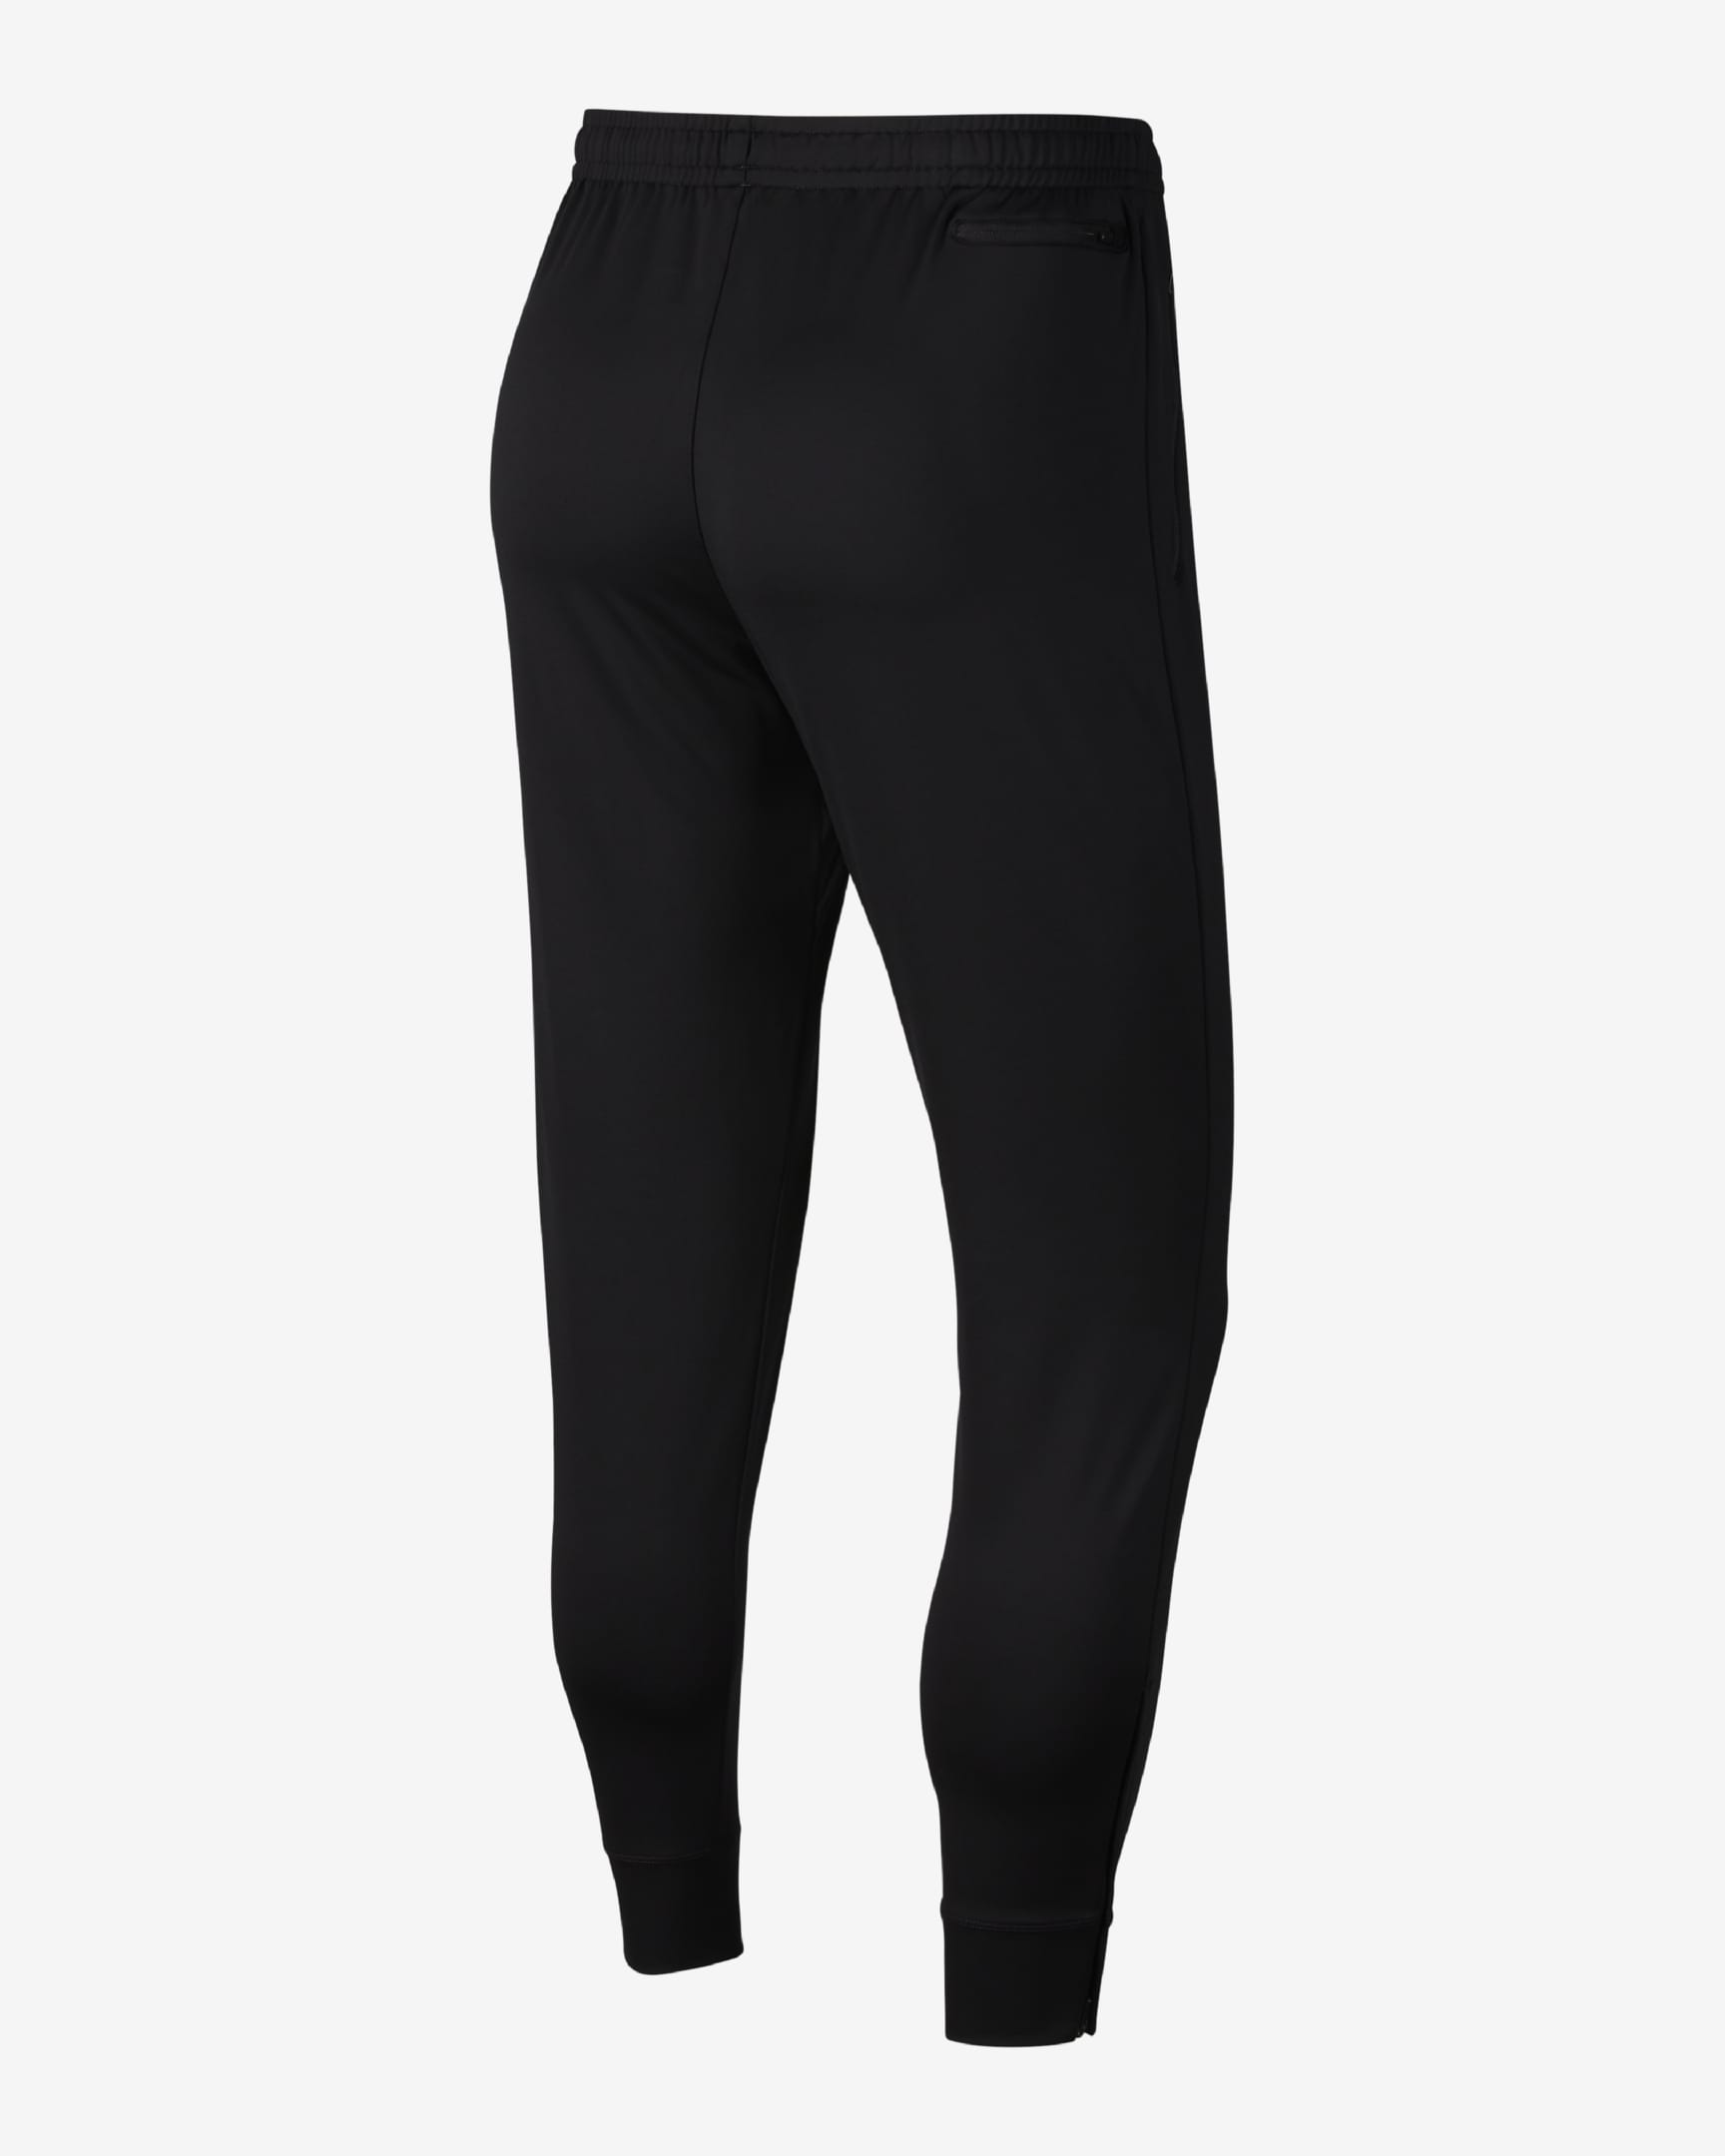 Nike Essential Men's Knit Running Trousers. Nike SG